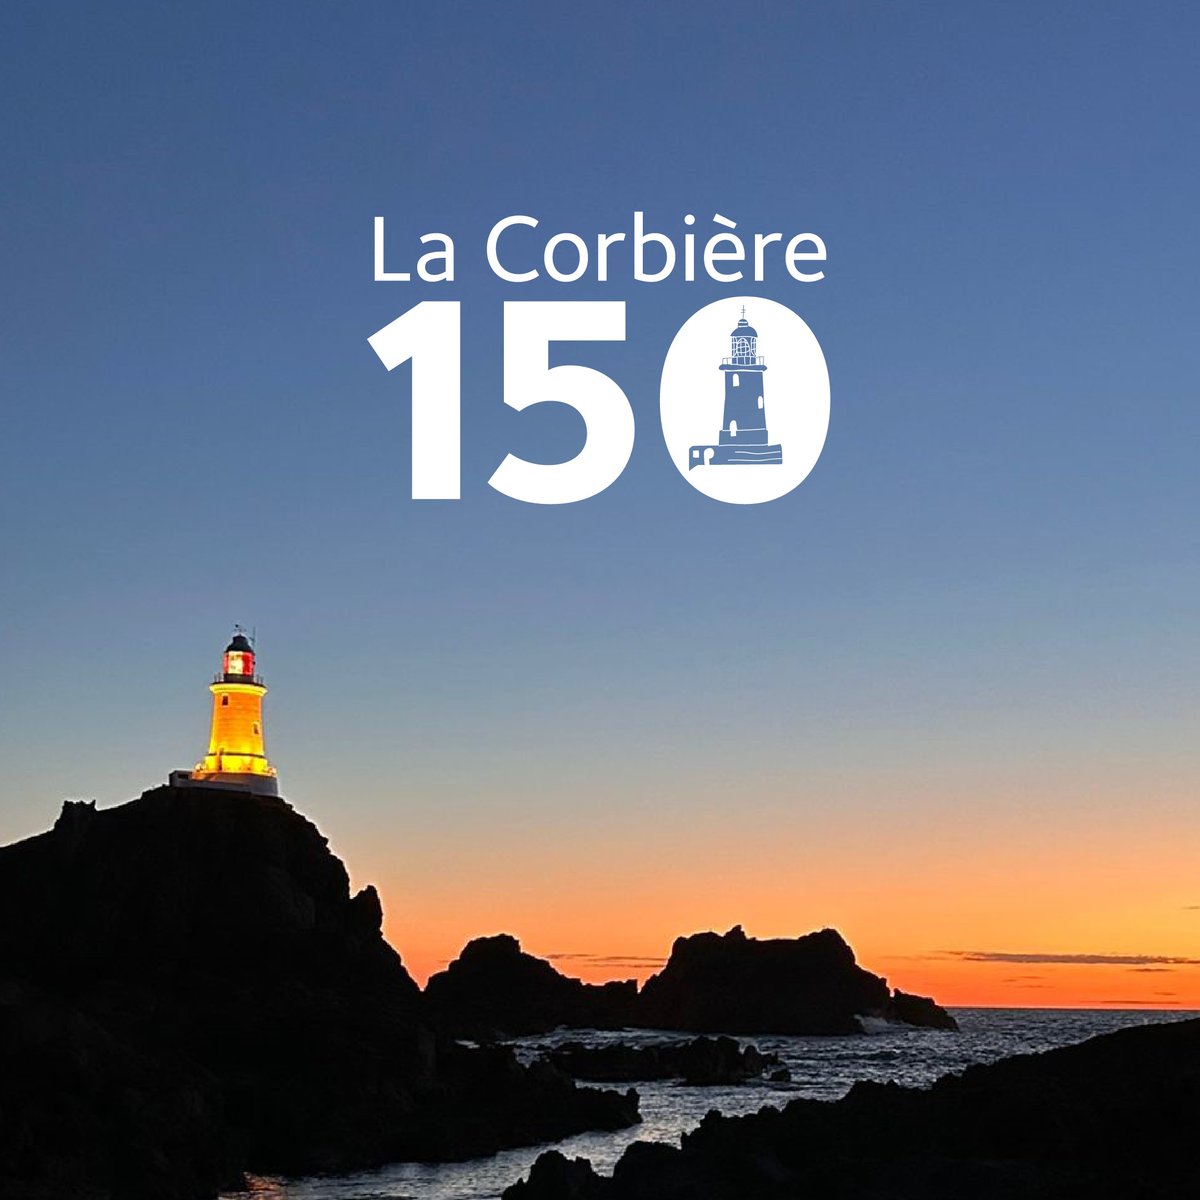 Ports of Jersey is the proud custodian of La Corbière & next week is the 150th anniversary of the lighthouse first being lit. From tomorrow La Corbière will be illuminated gold every night for the next week. Come & see Jersey’s most famous landmark in a new light. #LaCorbière150